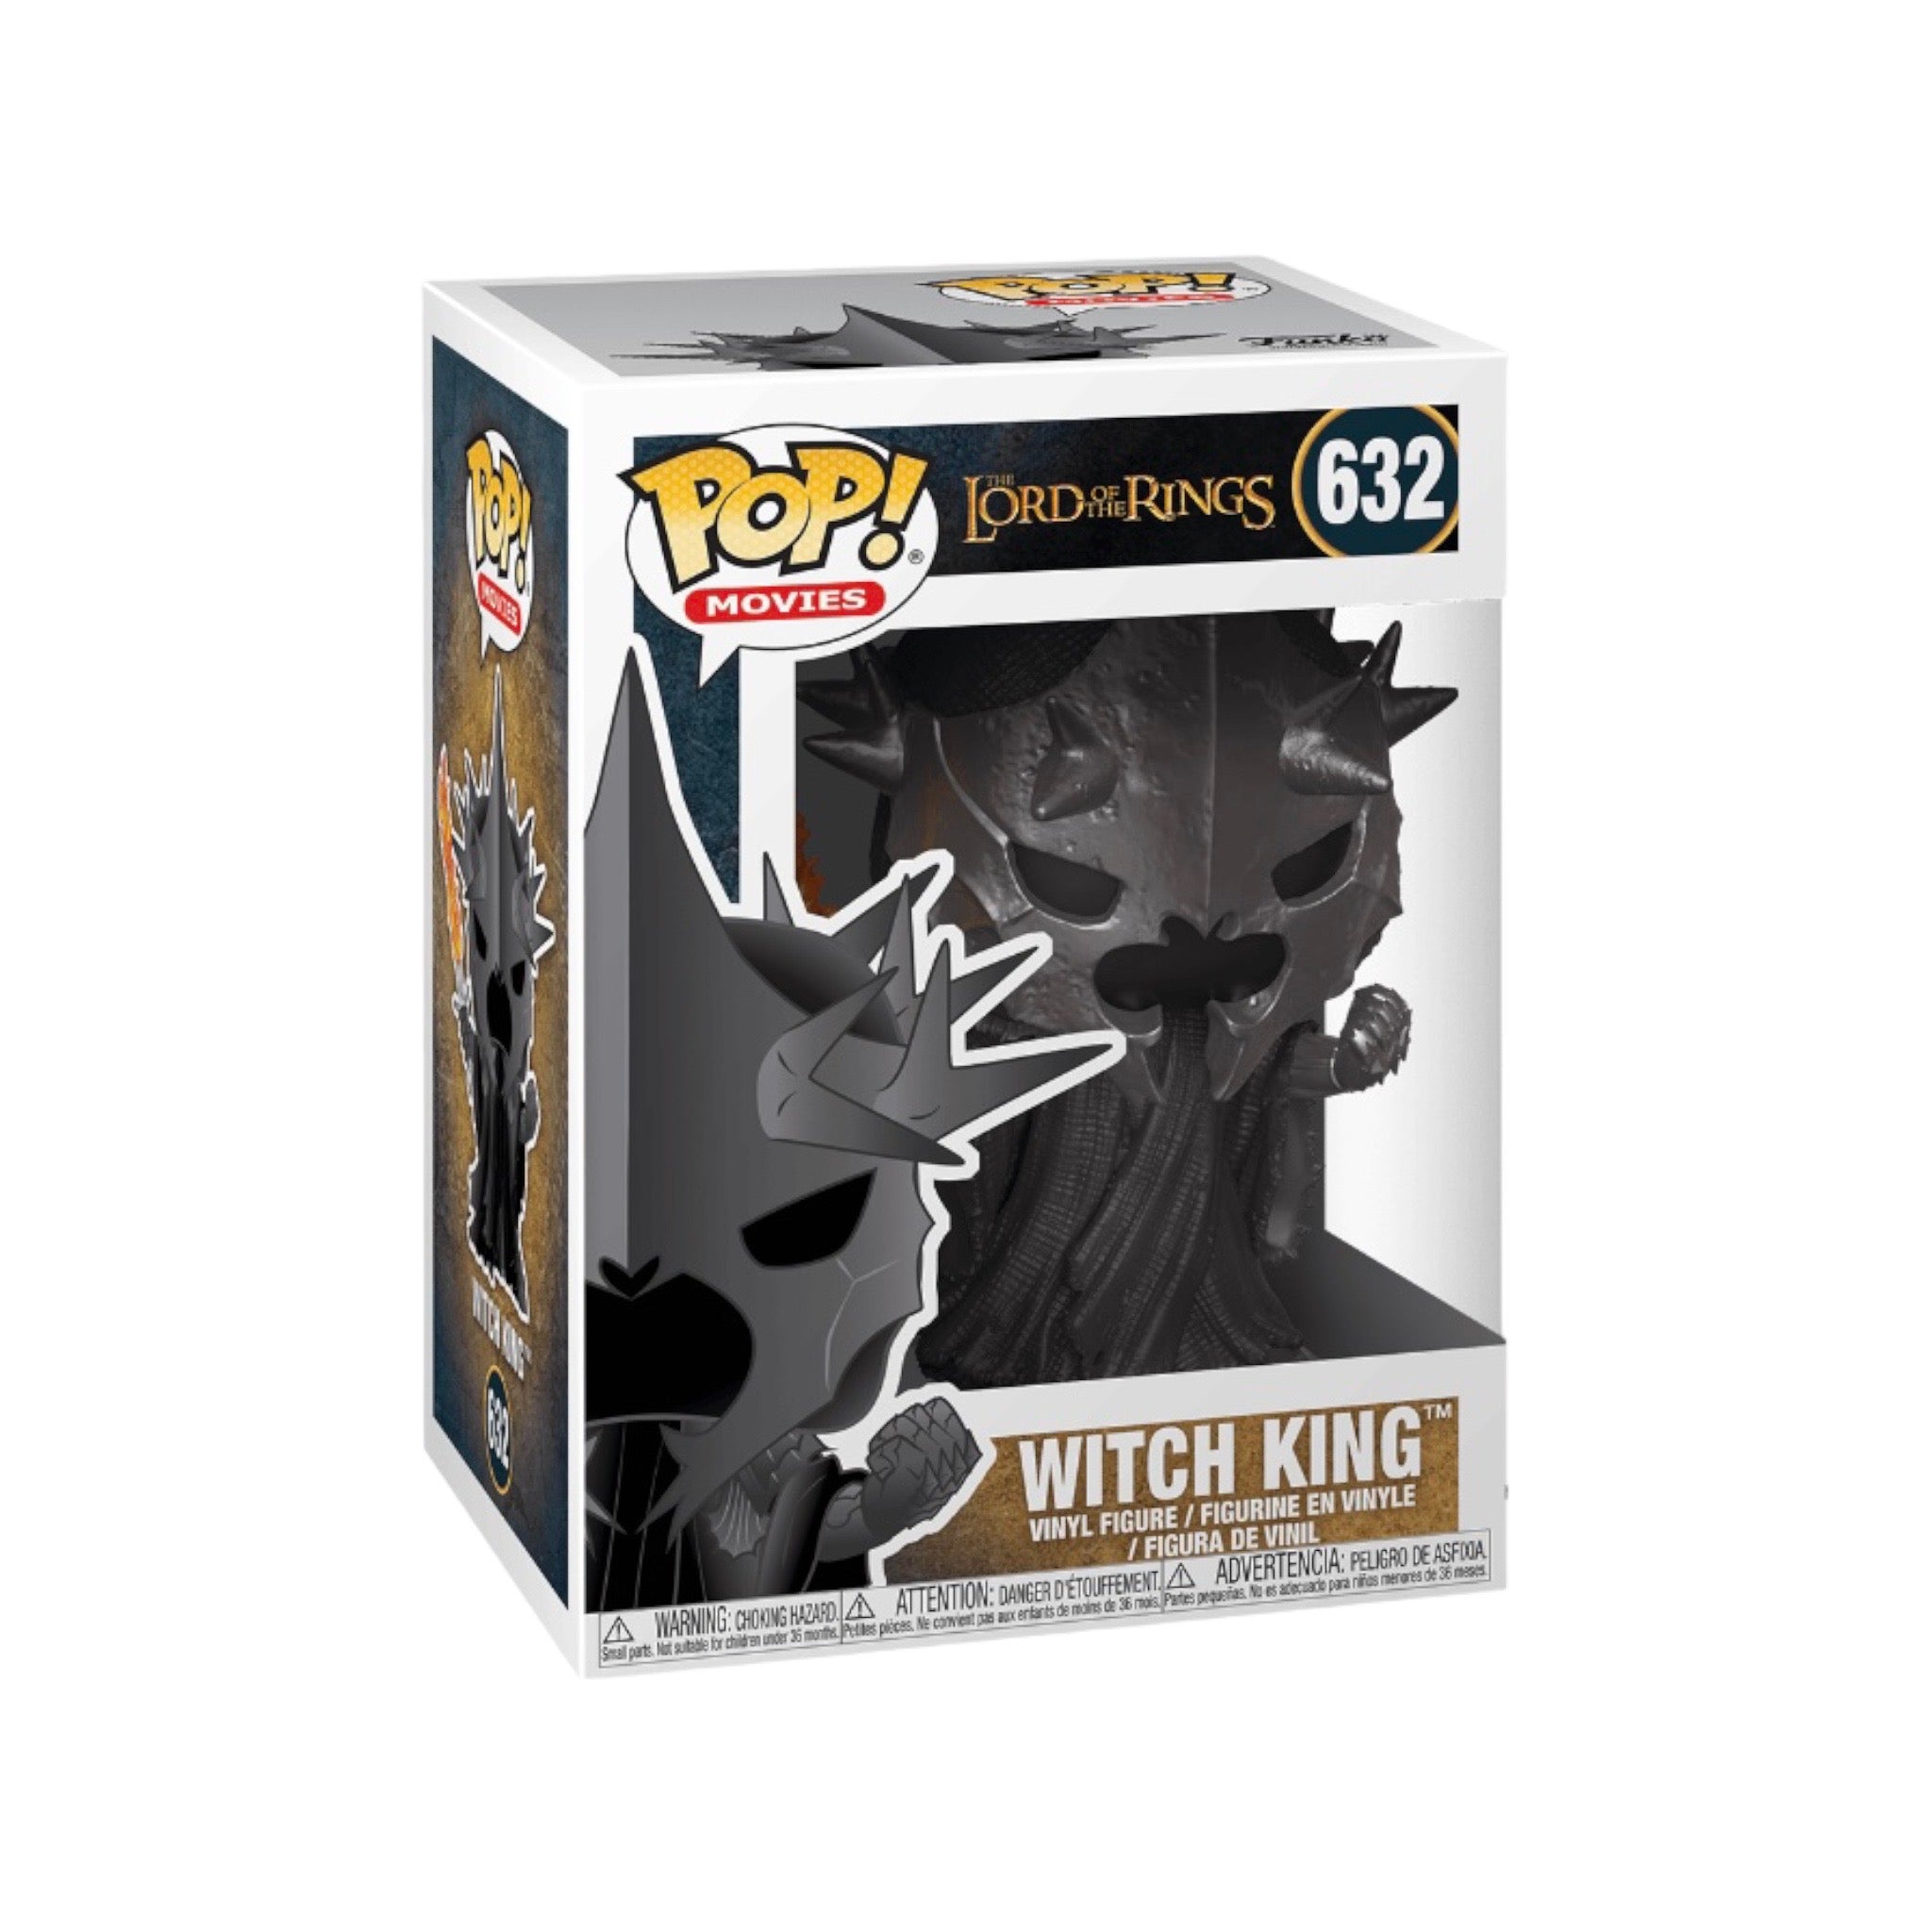 Witch King #632 Funko Pop! - The Lord of The Rings